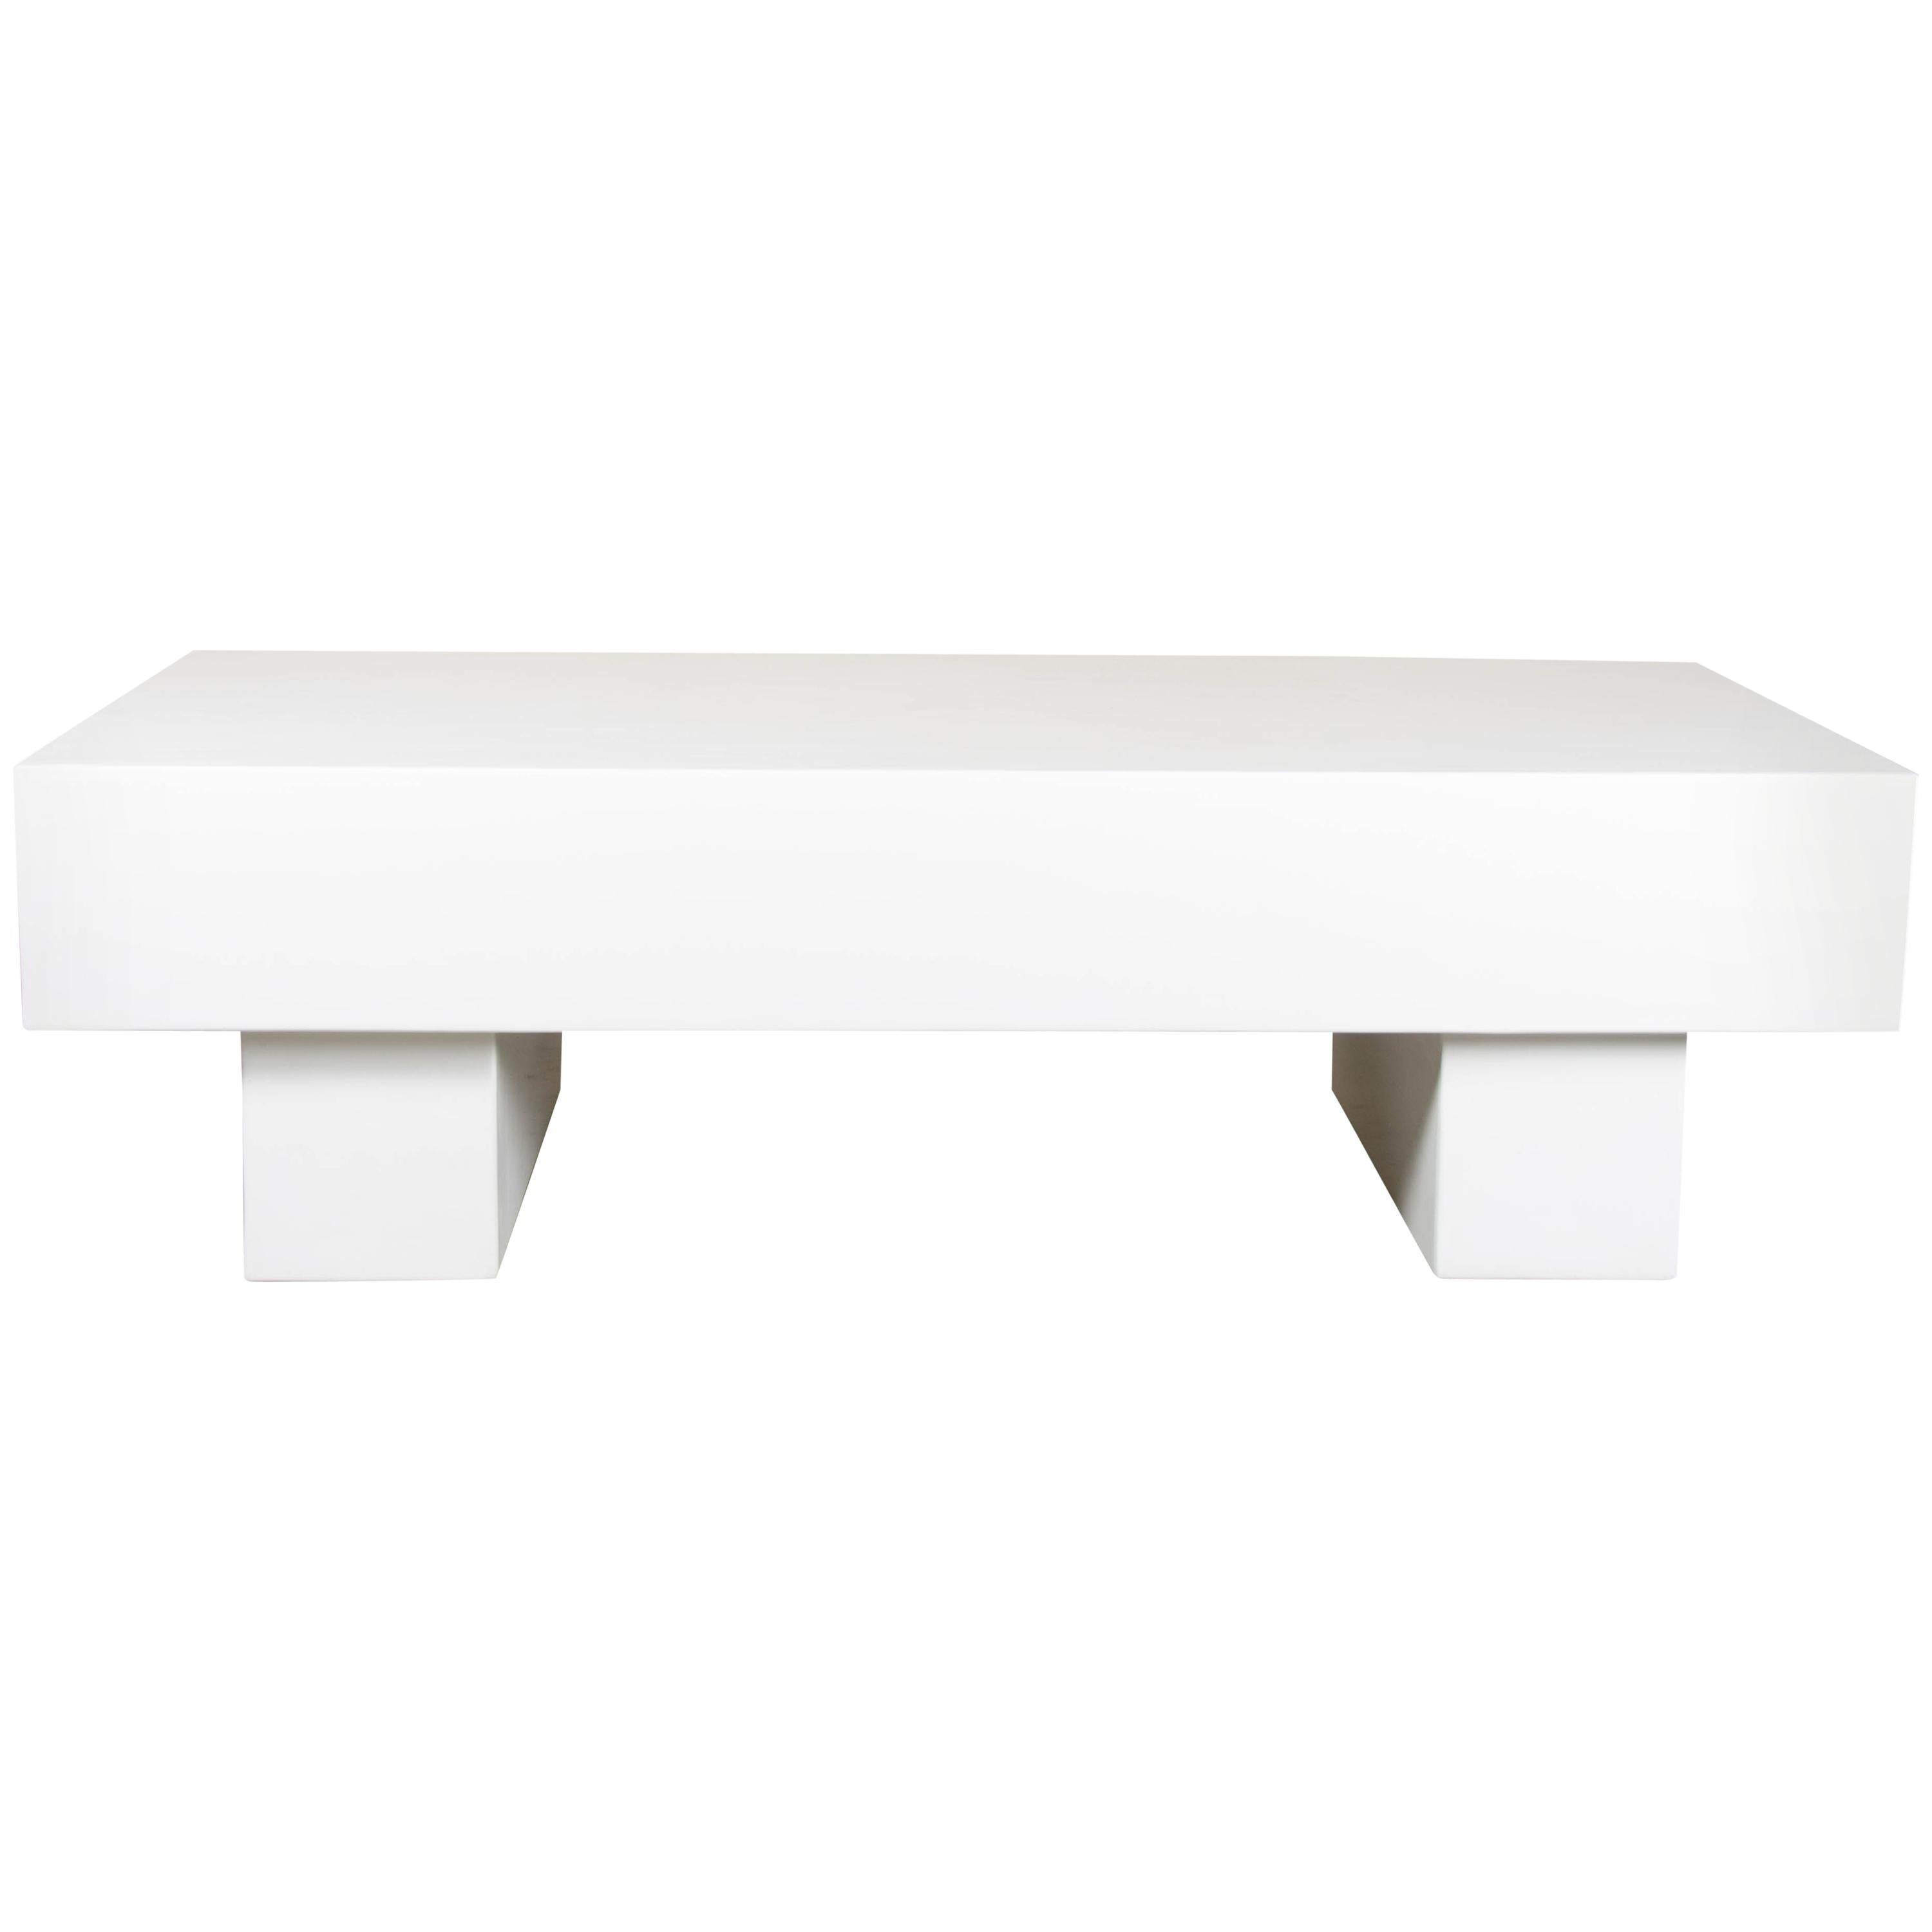 Low "T" Table, Cream Lacquer by Robert Kuo, Limited Edition